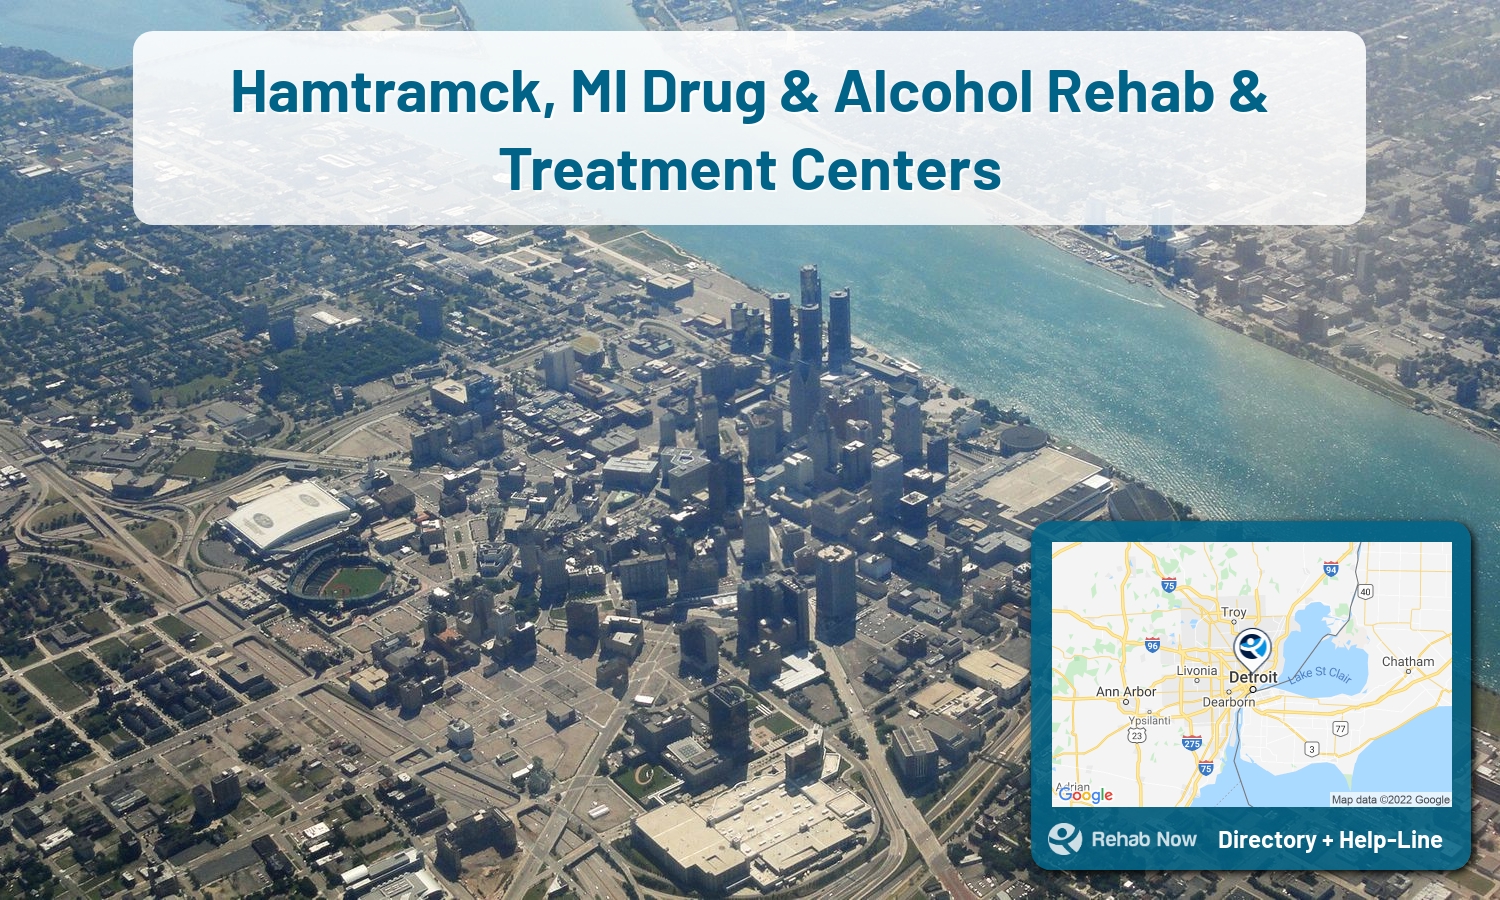 Hamtramck, MI Treatment Centers. Find drug rehab in Hamtramck, Michigan, or detox and treatment programs. Get the right help now!